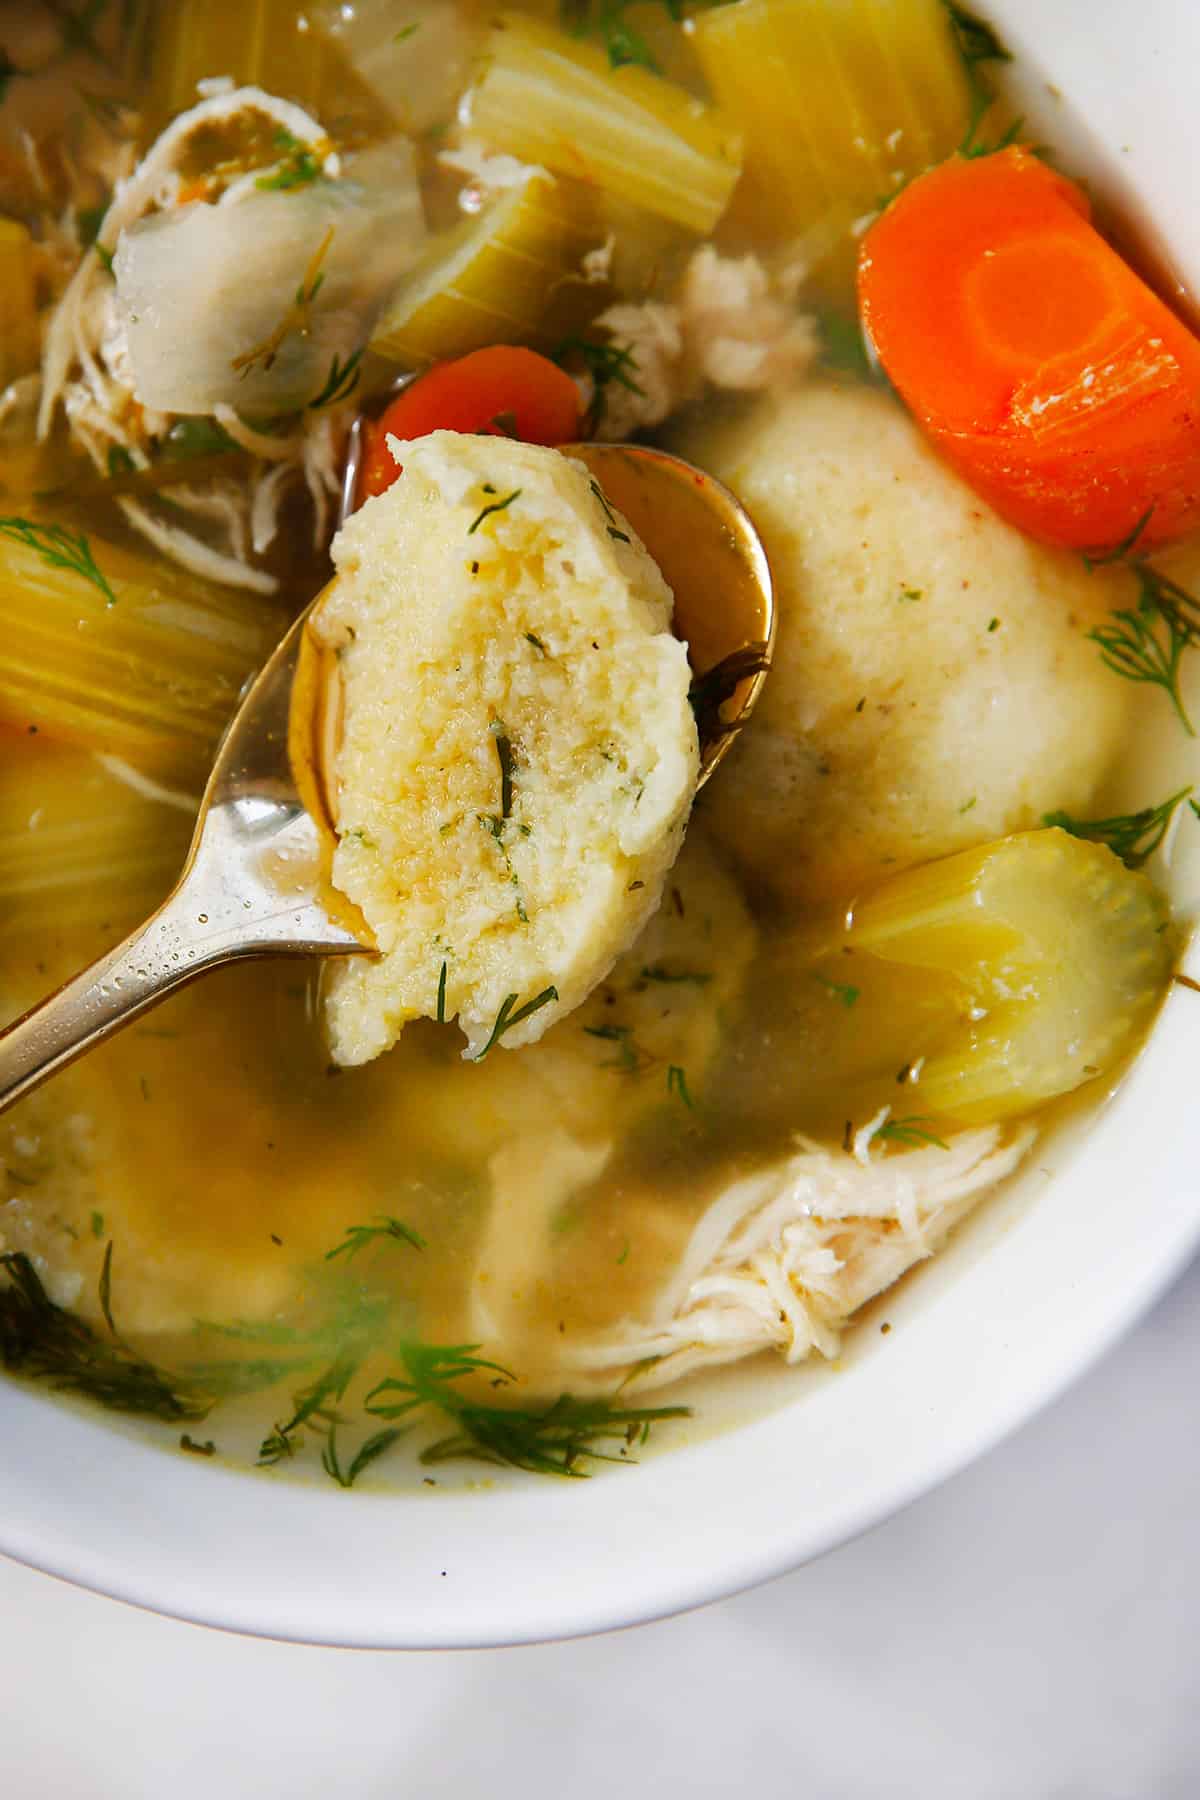 gluten free matzo ball soup is delicious and easy to make